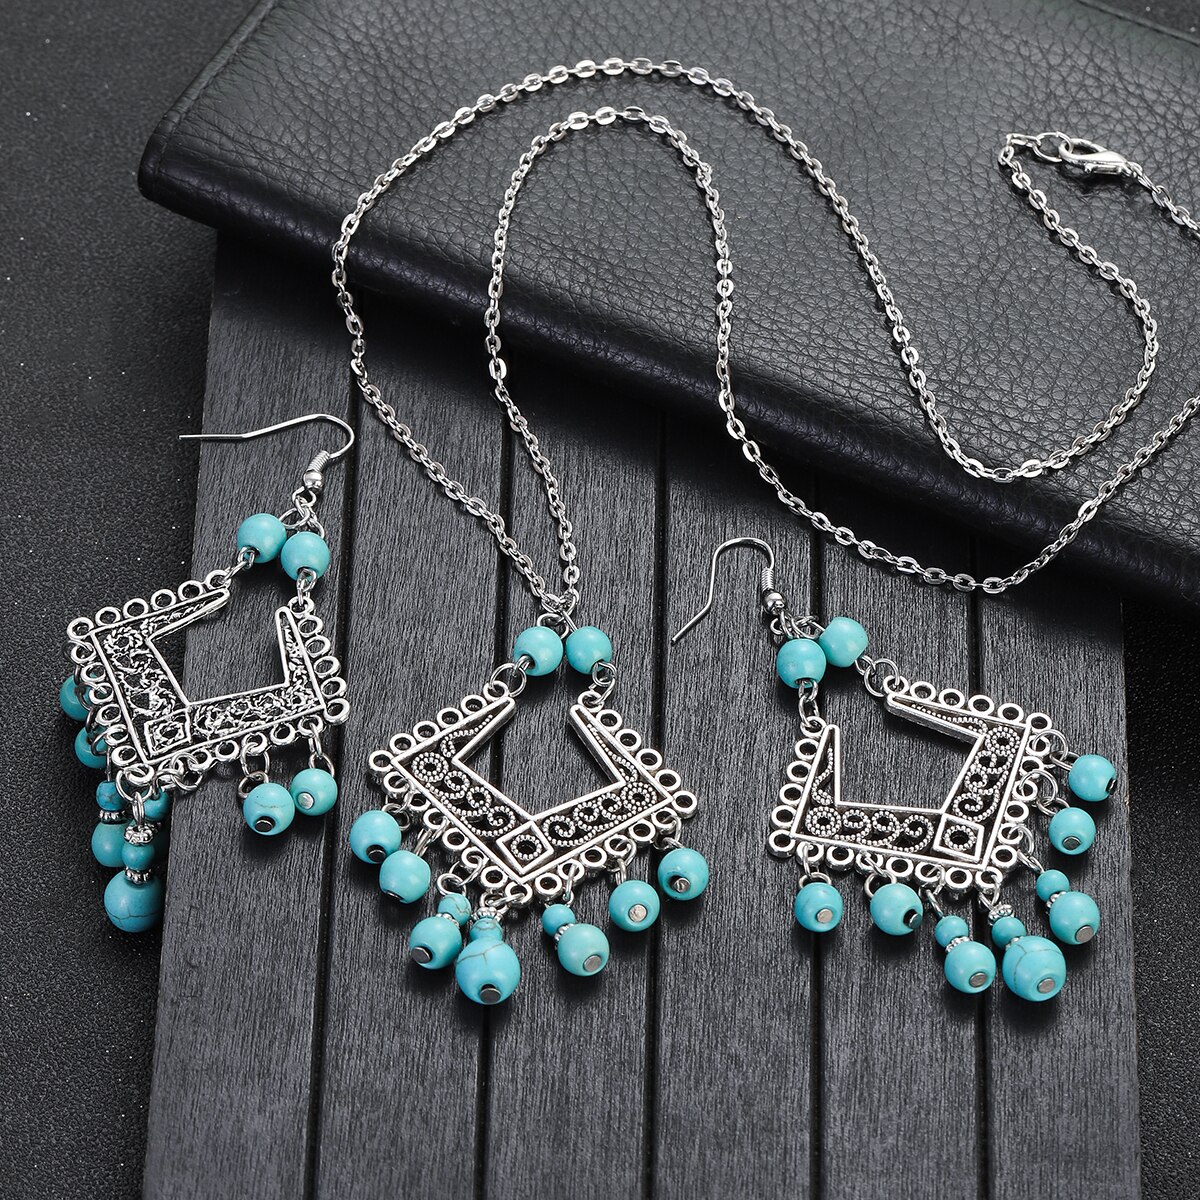 Ethnic-Boho-Blue-Stone-Tassel-Jewelry-Set-Charm-Ladies-Vintage-Jewelry-Silver-Color-Hollow-Flower-Ch-1005005134002231-8